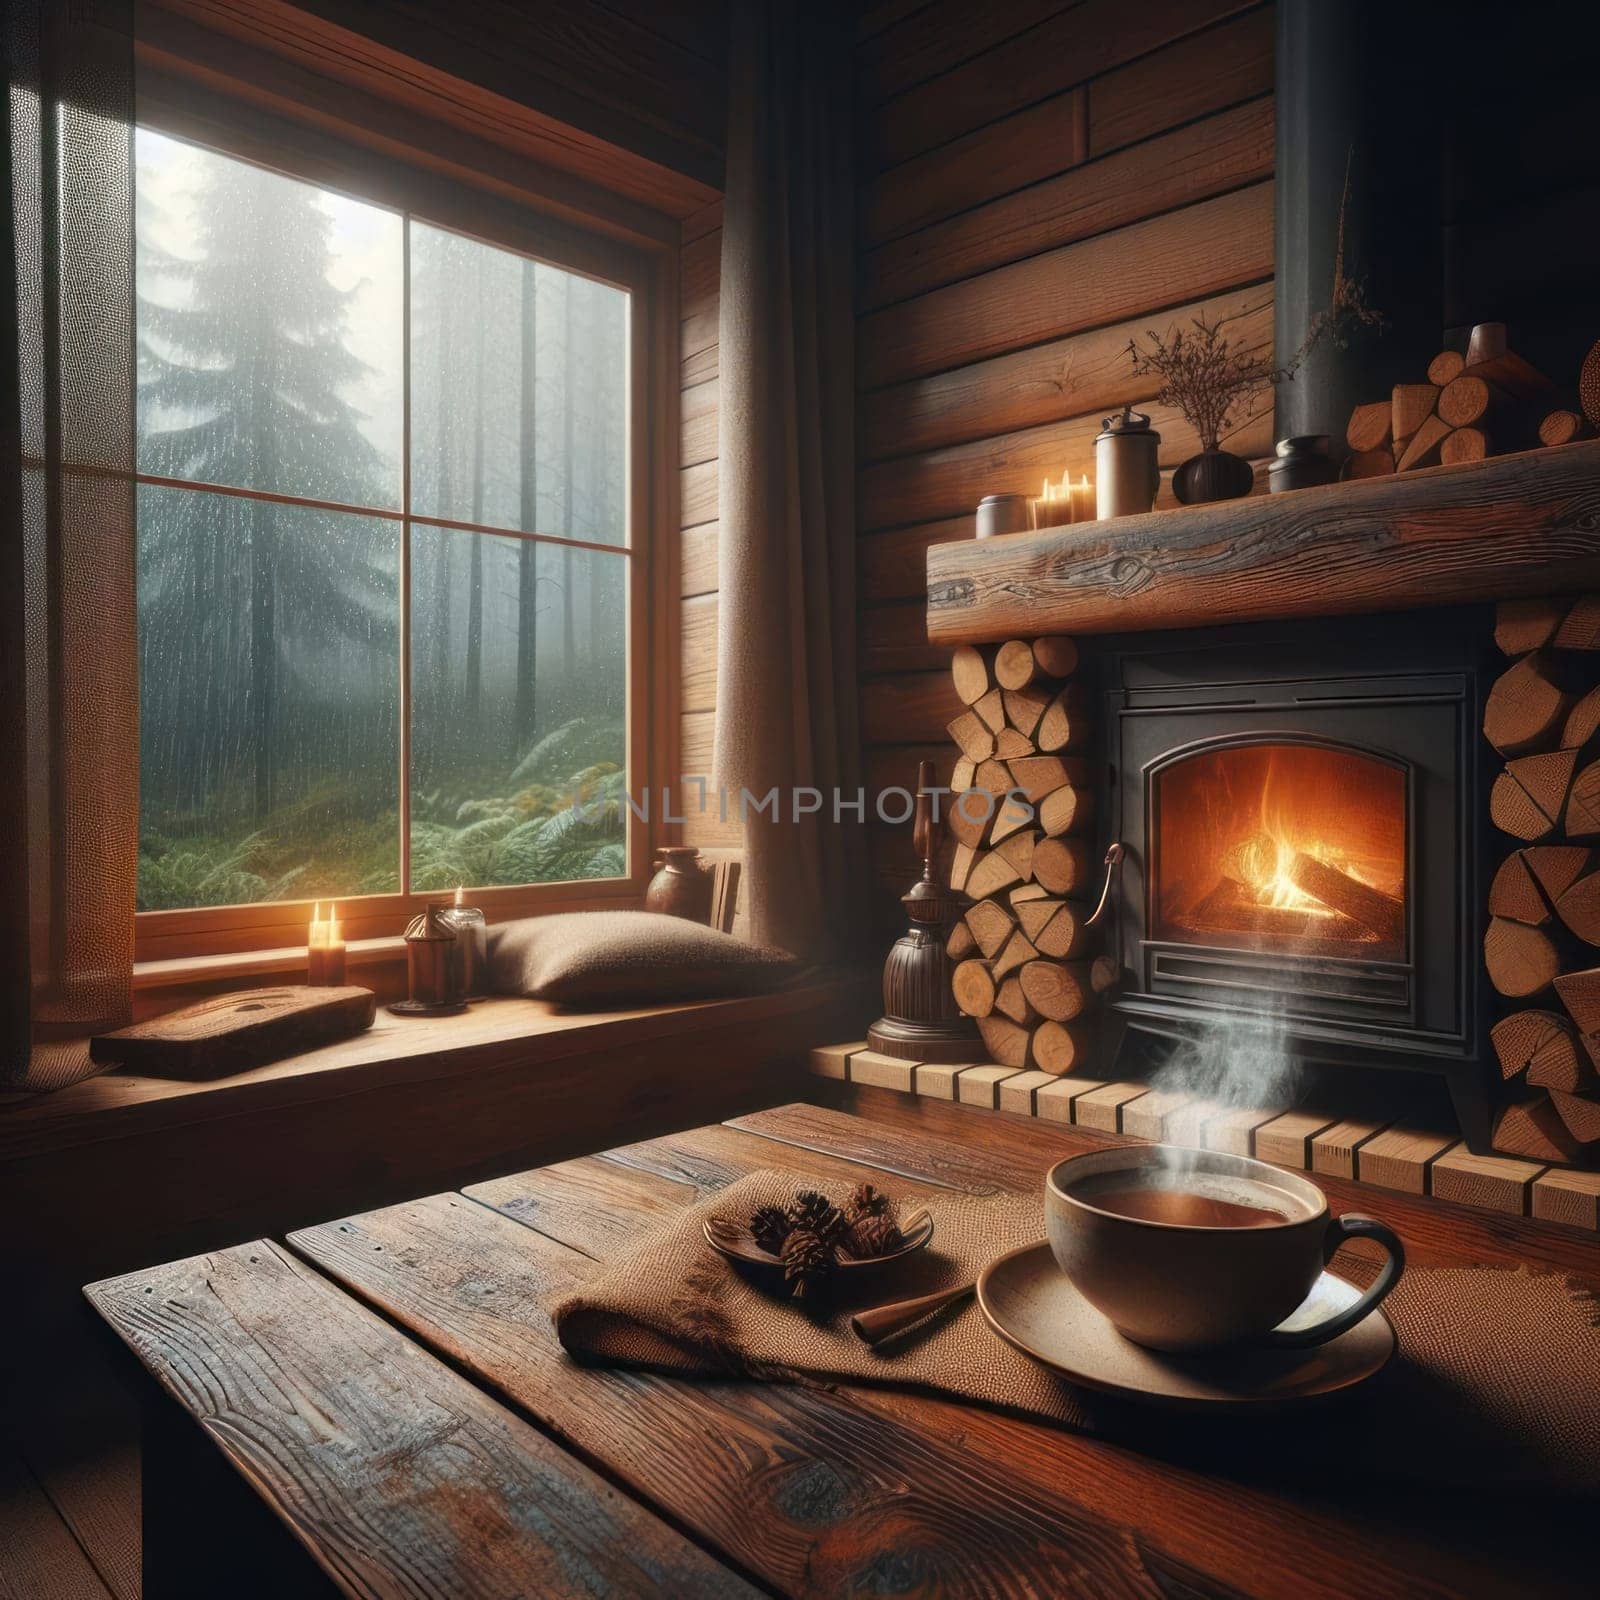 Wood is burning in a fireplace in a wooden cottage. Outside the window it is raining in a wild forest. A cup stands on a wooden table. Steam rises from a hot drink. AI generated